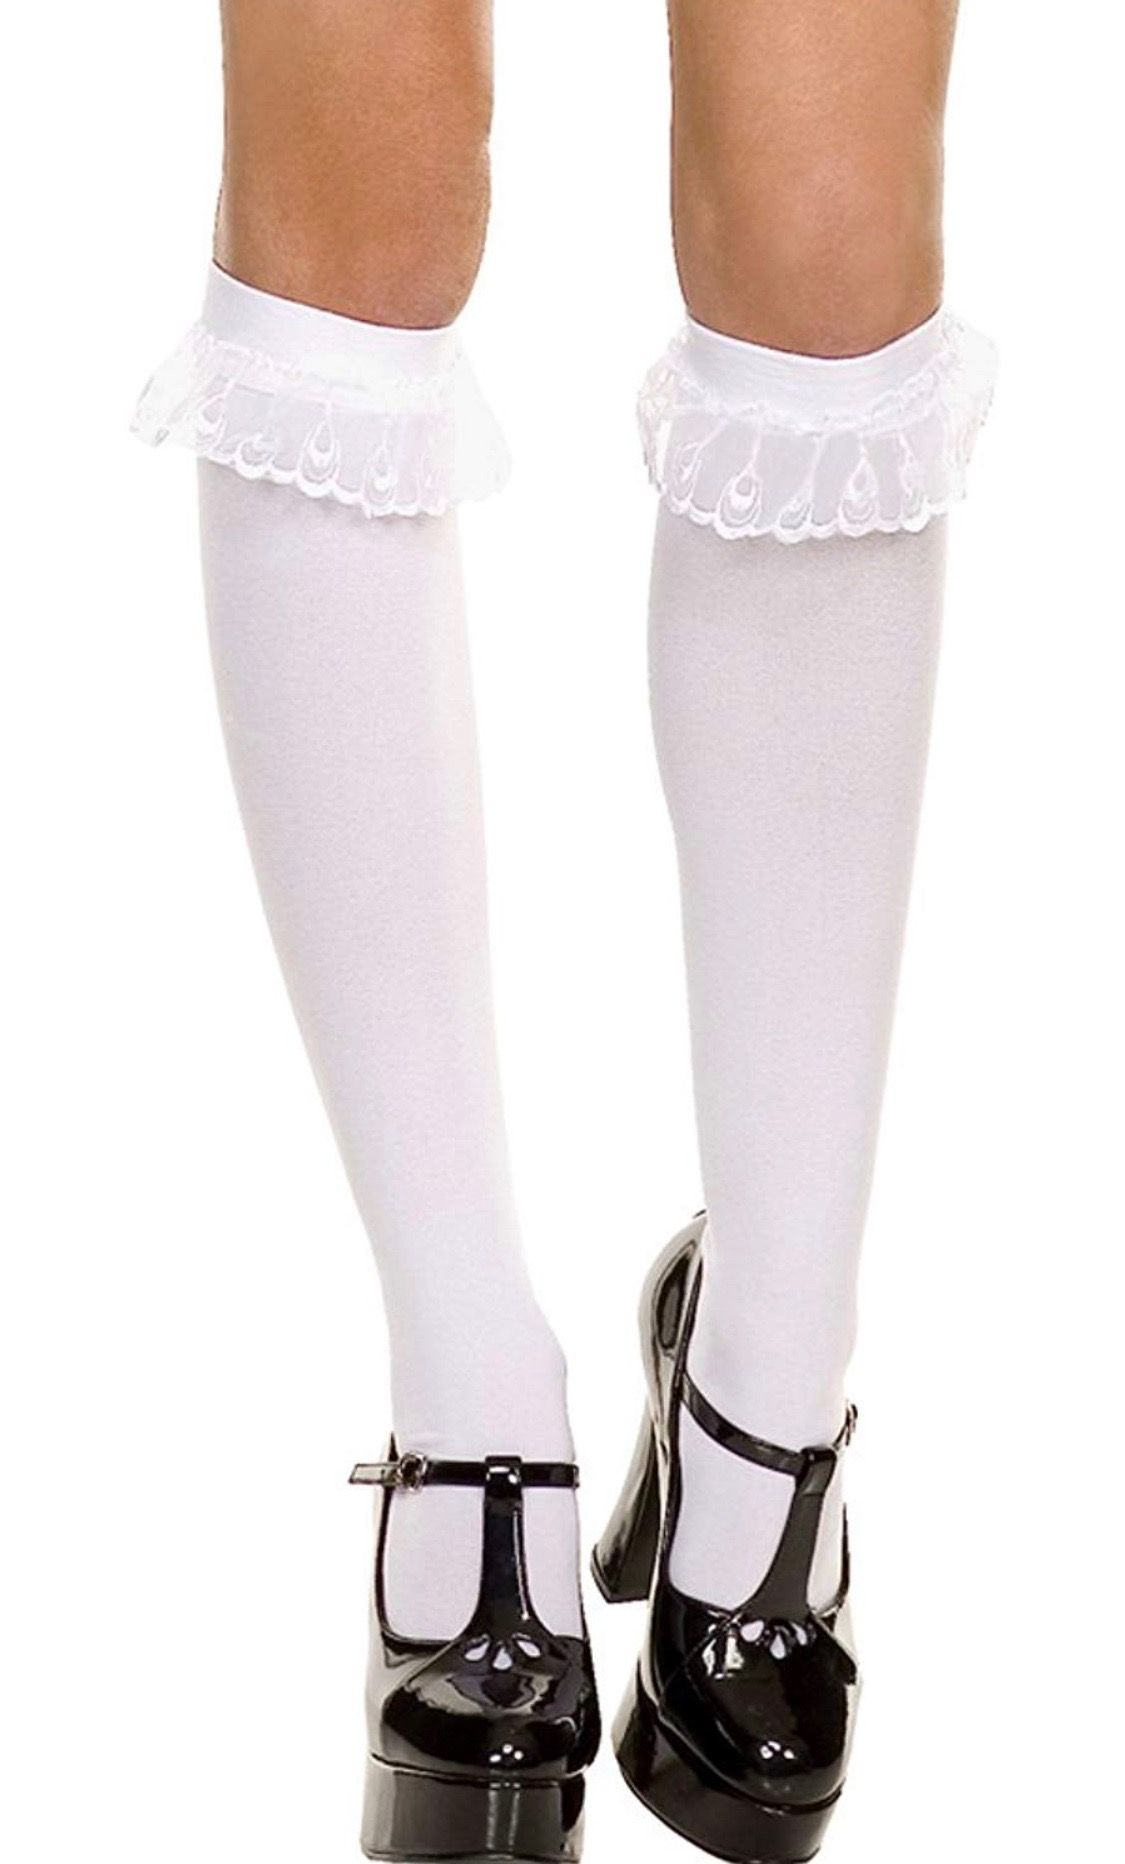 Pin By Max Montes On Halloween 2018 White Knee High Socks Knee High